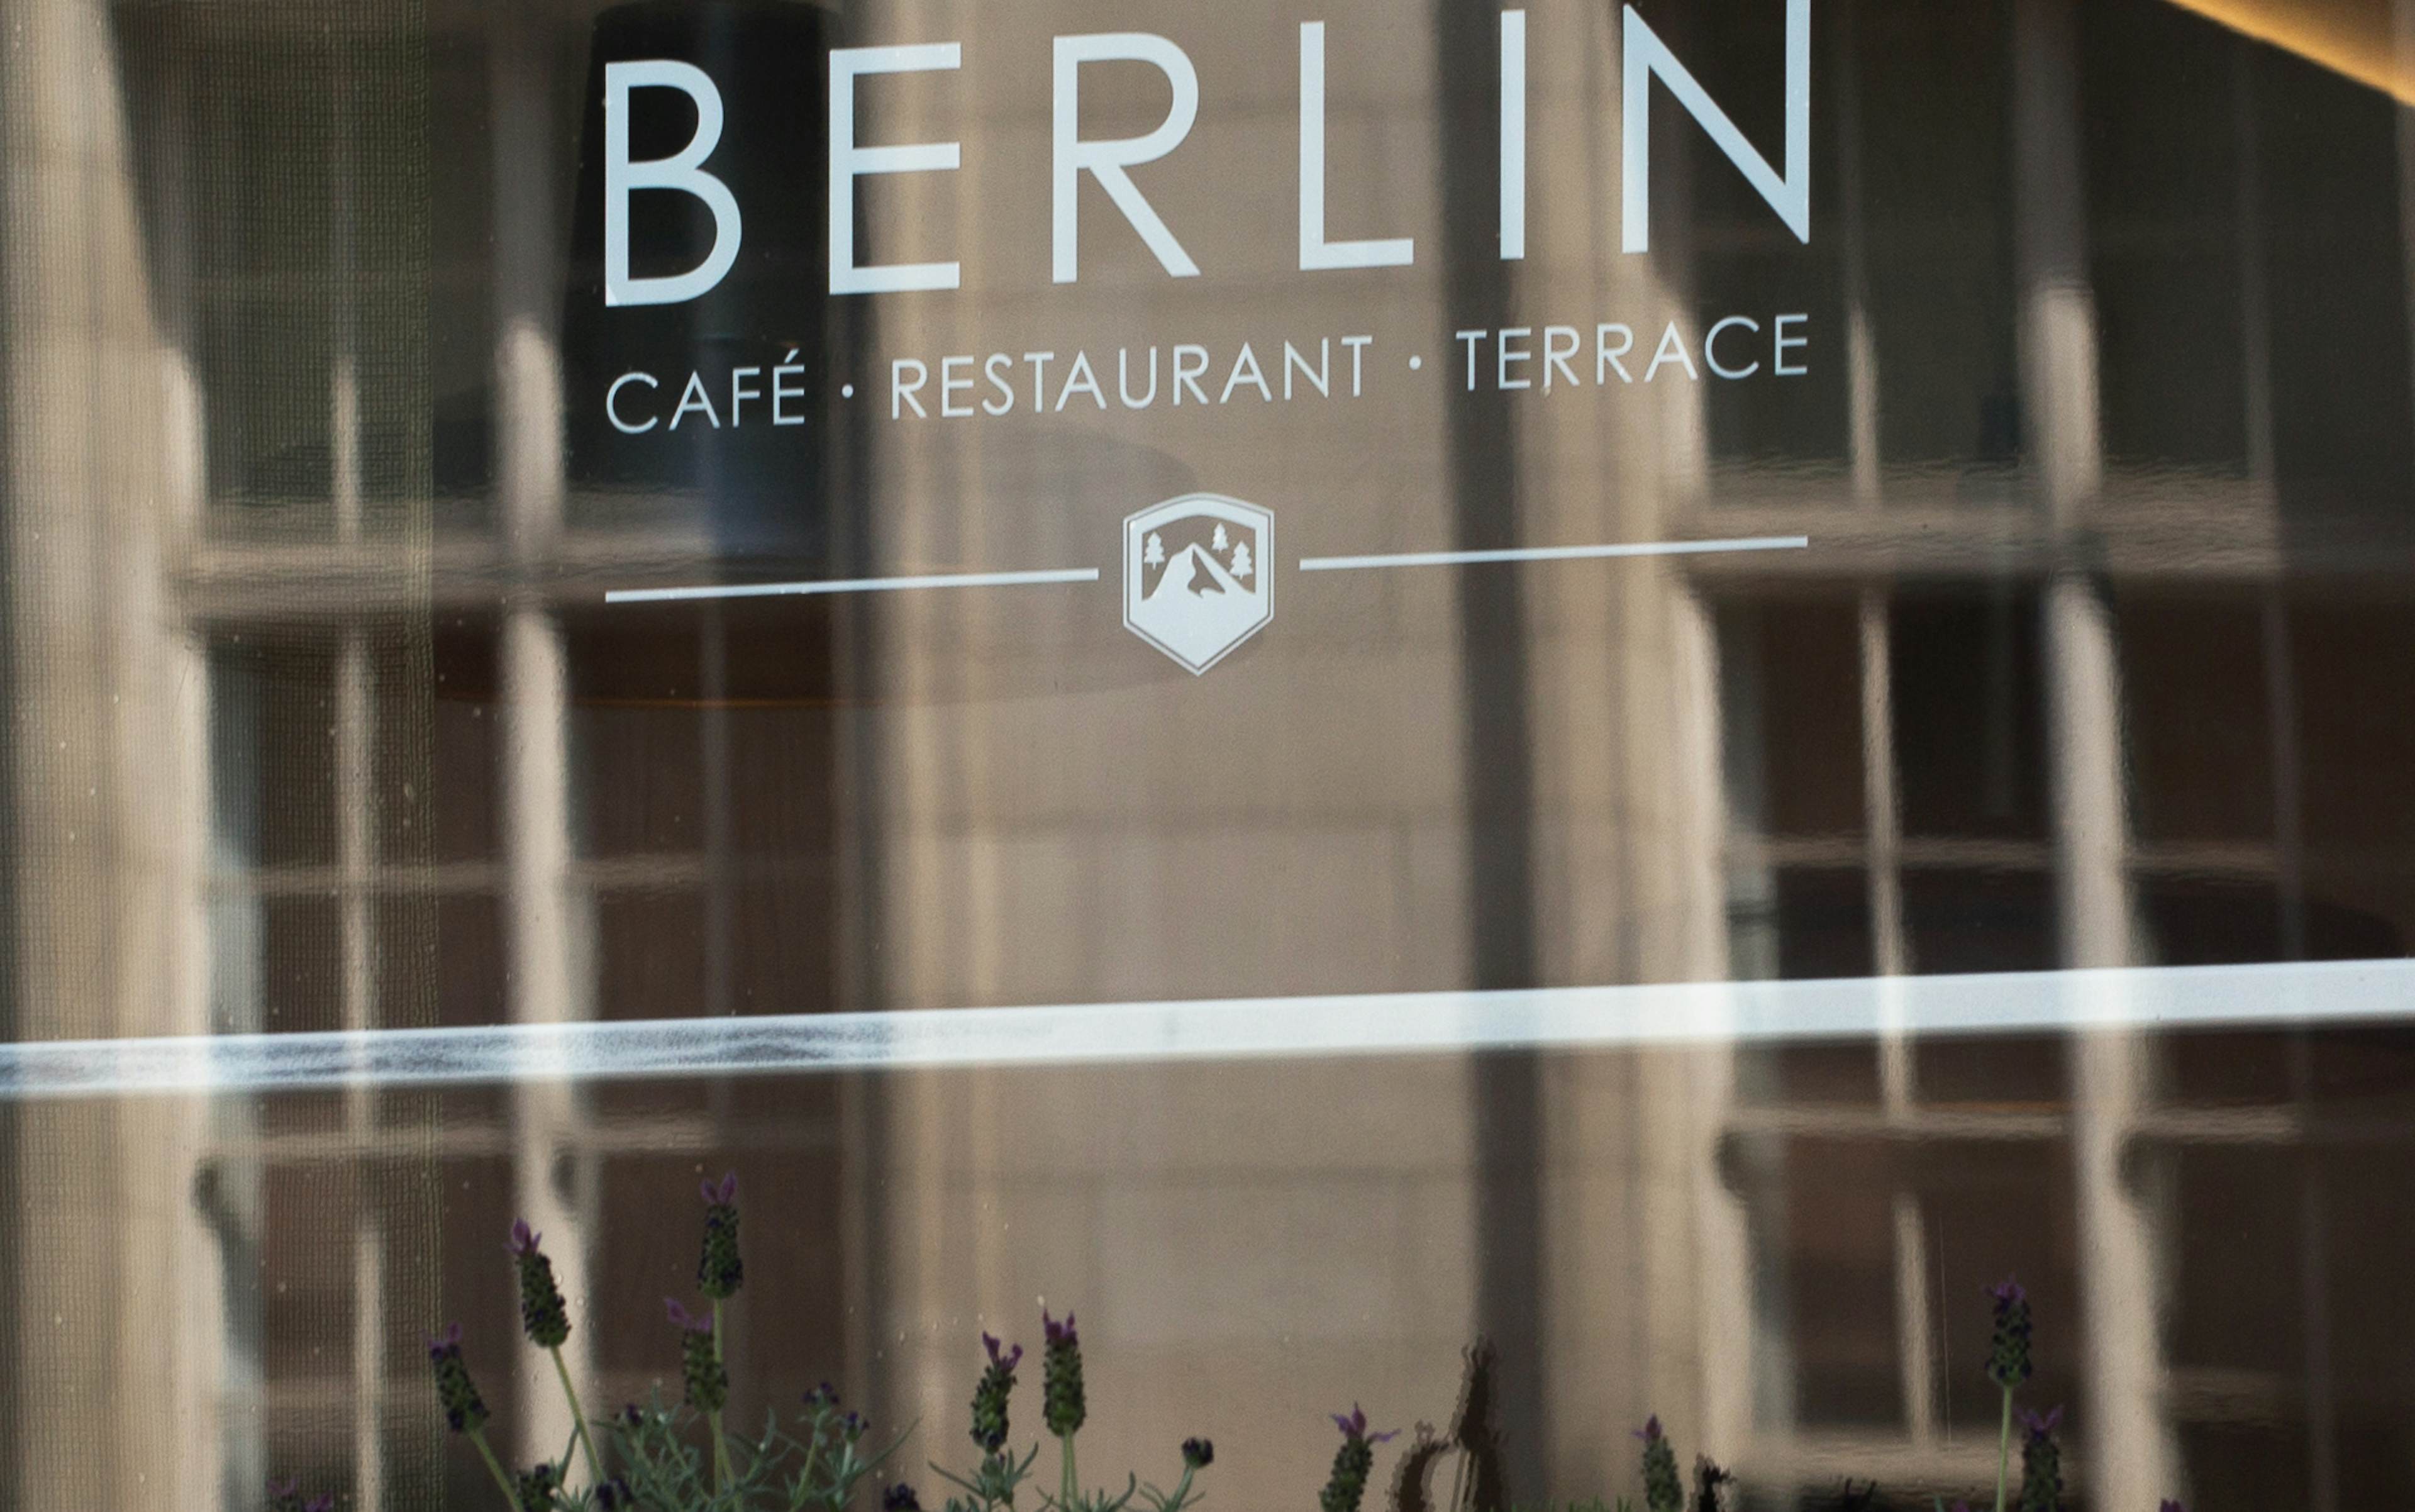 Stein's Berlin Restaurant and Terrace - Function Room image 1